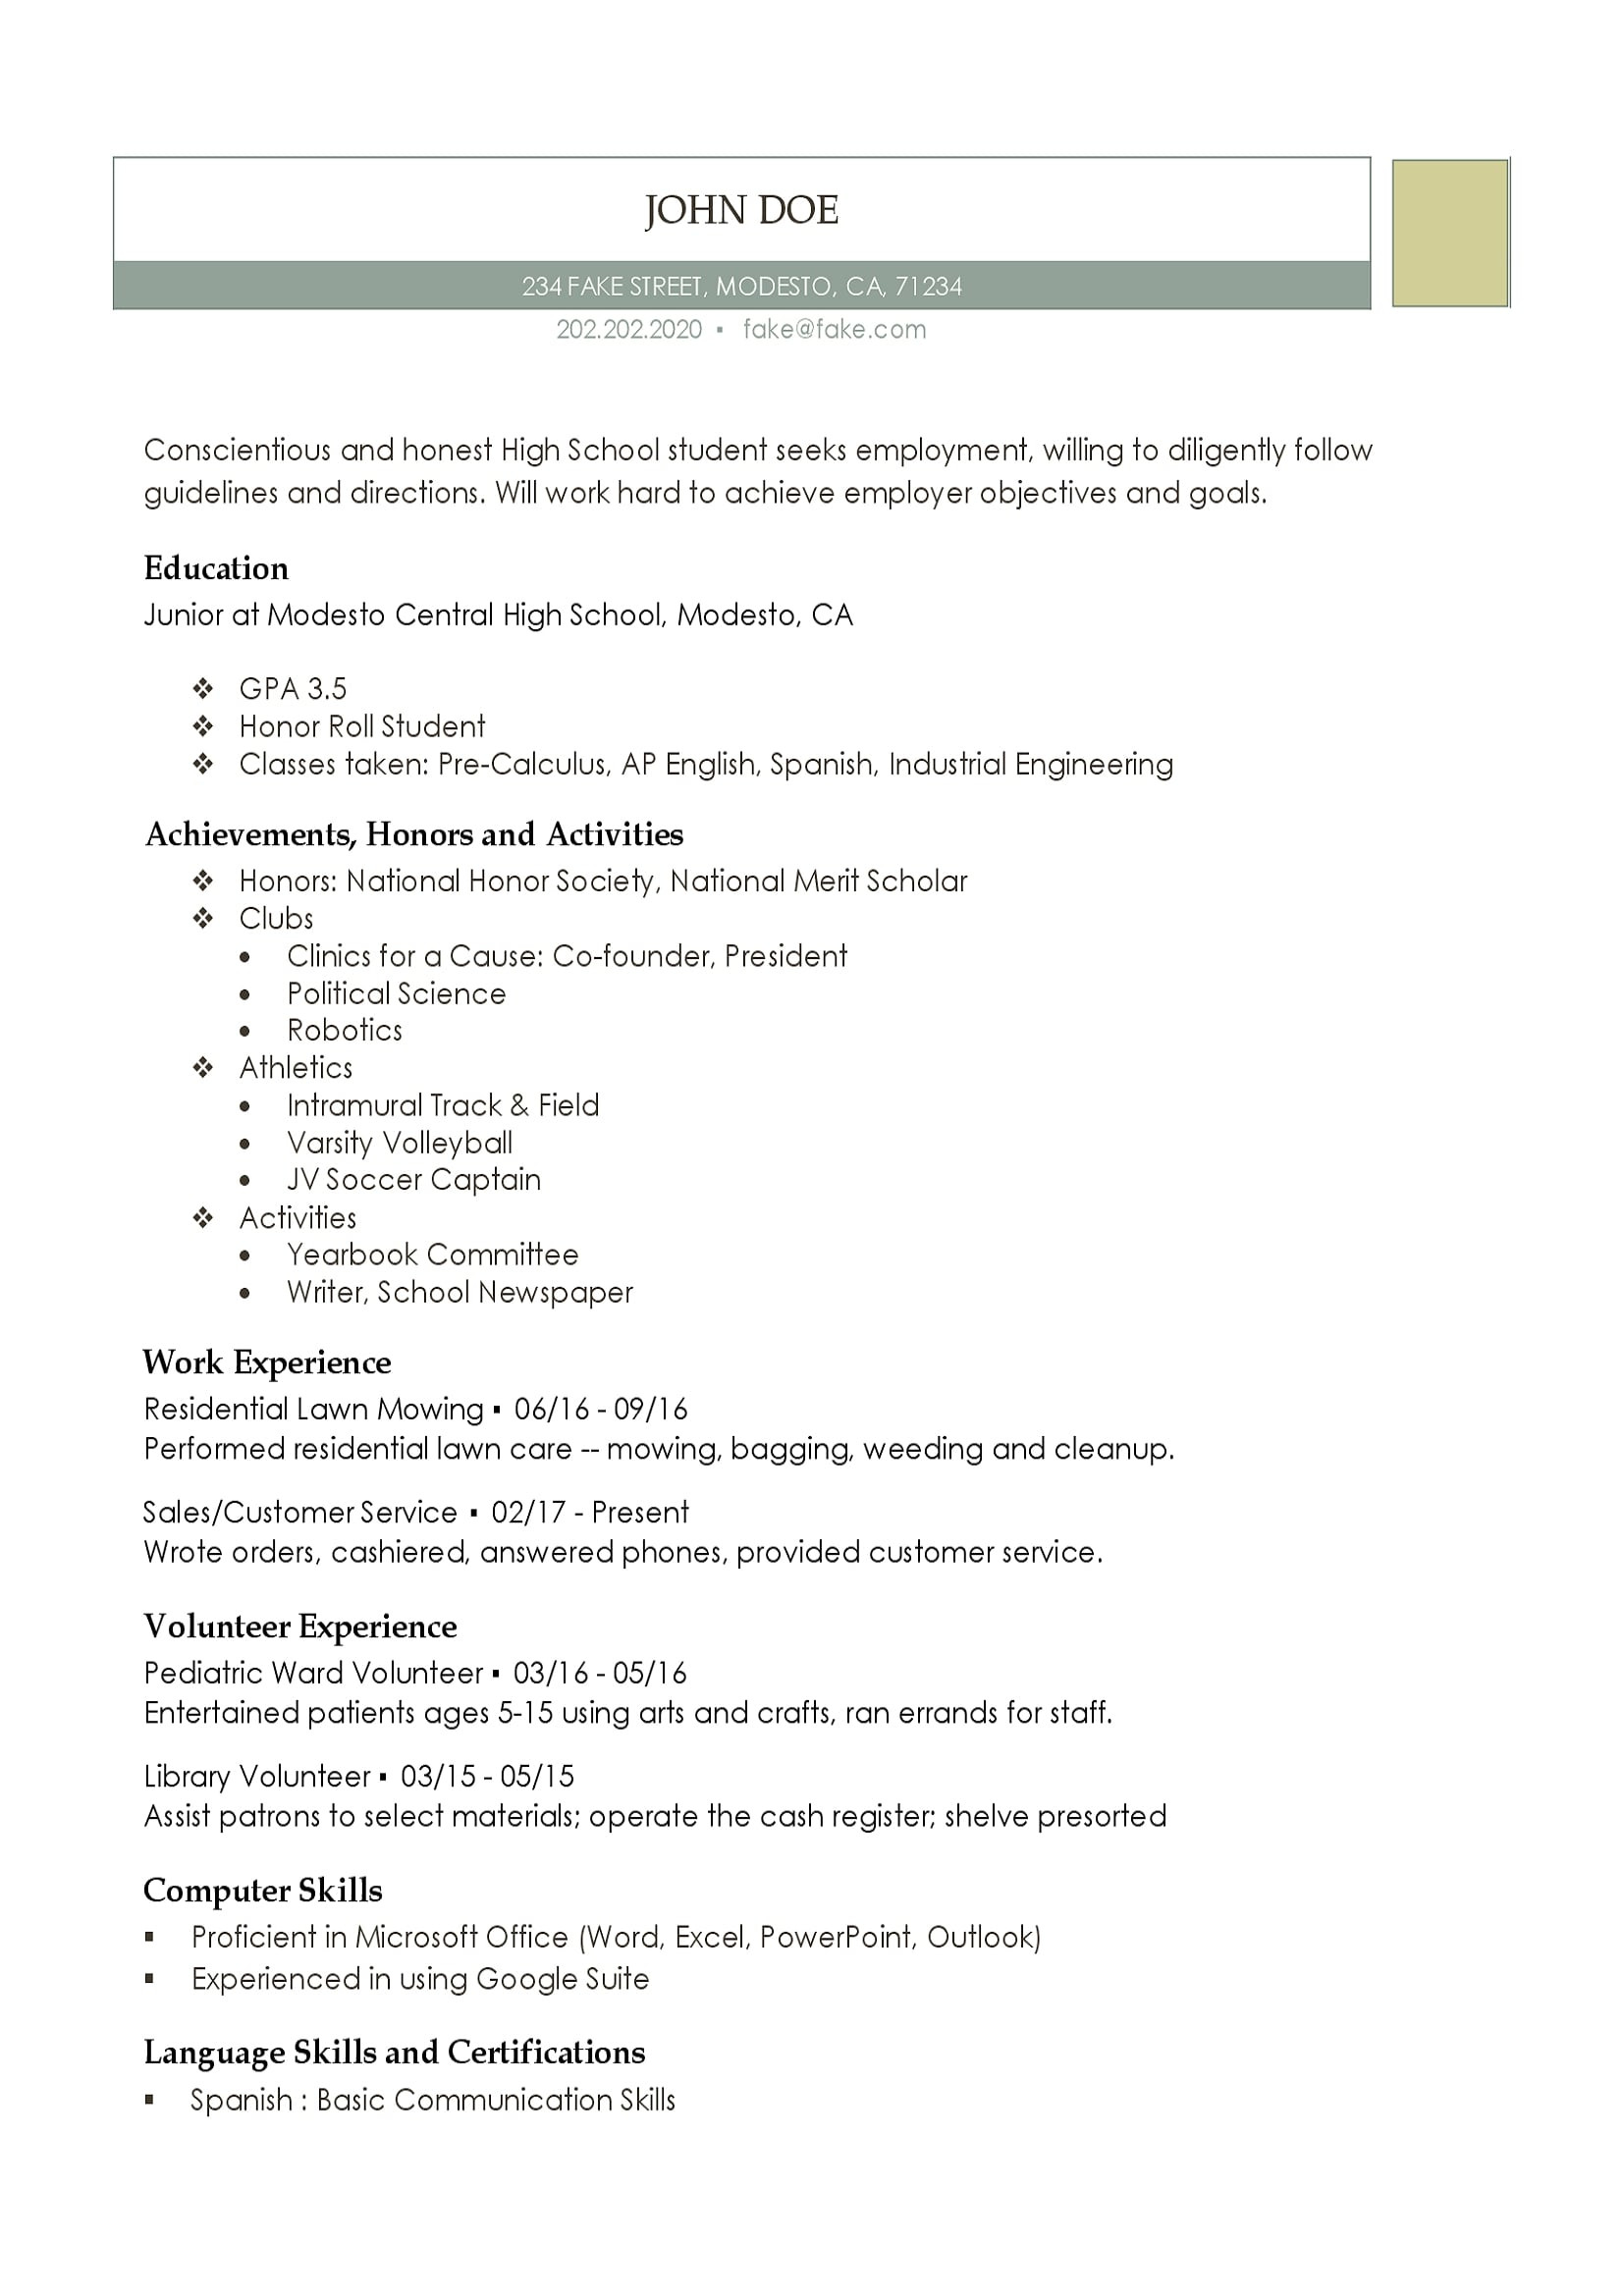 Resume Templates Free for High School Students High School Resume – Resume Templates for High School Students and …